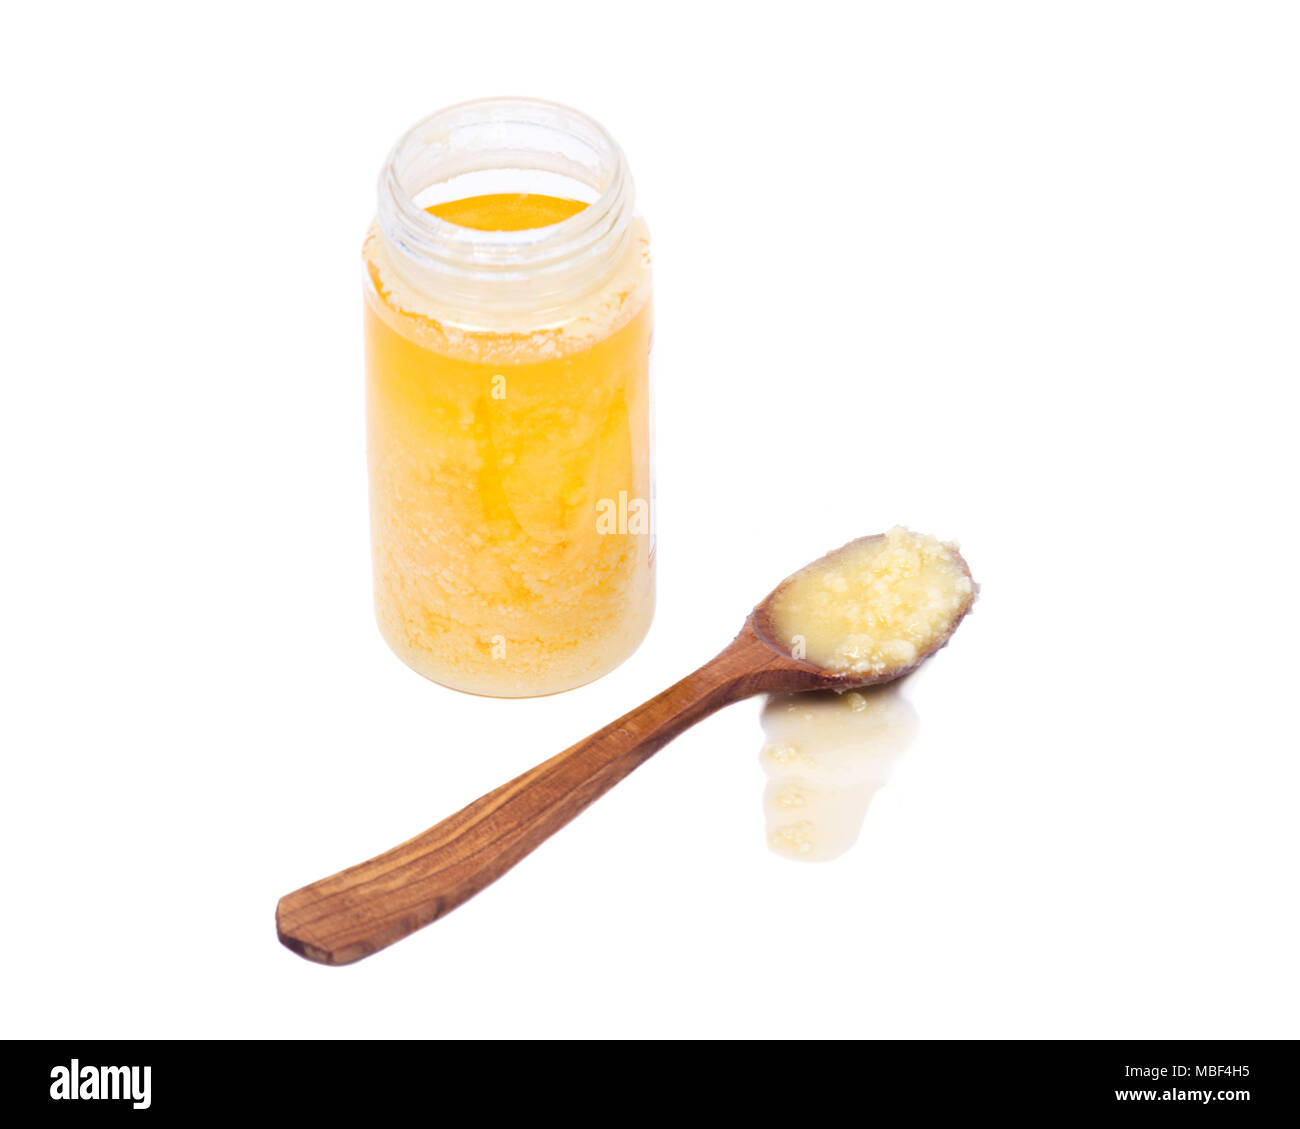 Clarified butter ghee in wooden spoon and plastic jar isolated on white background Stock Photo